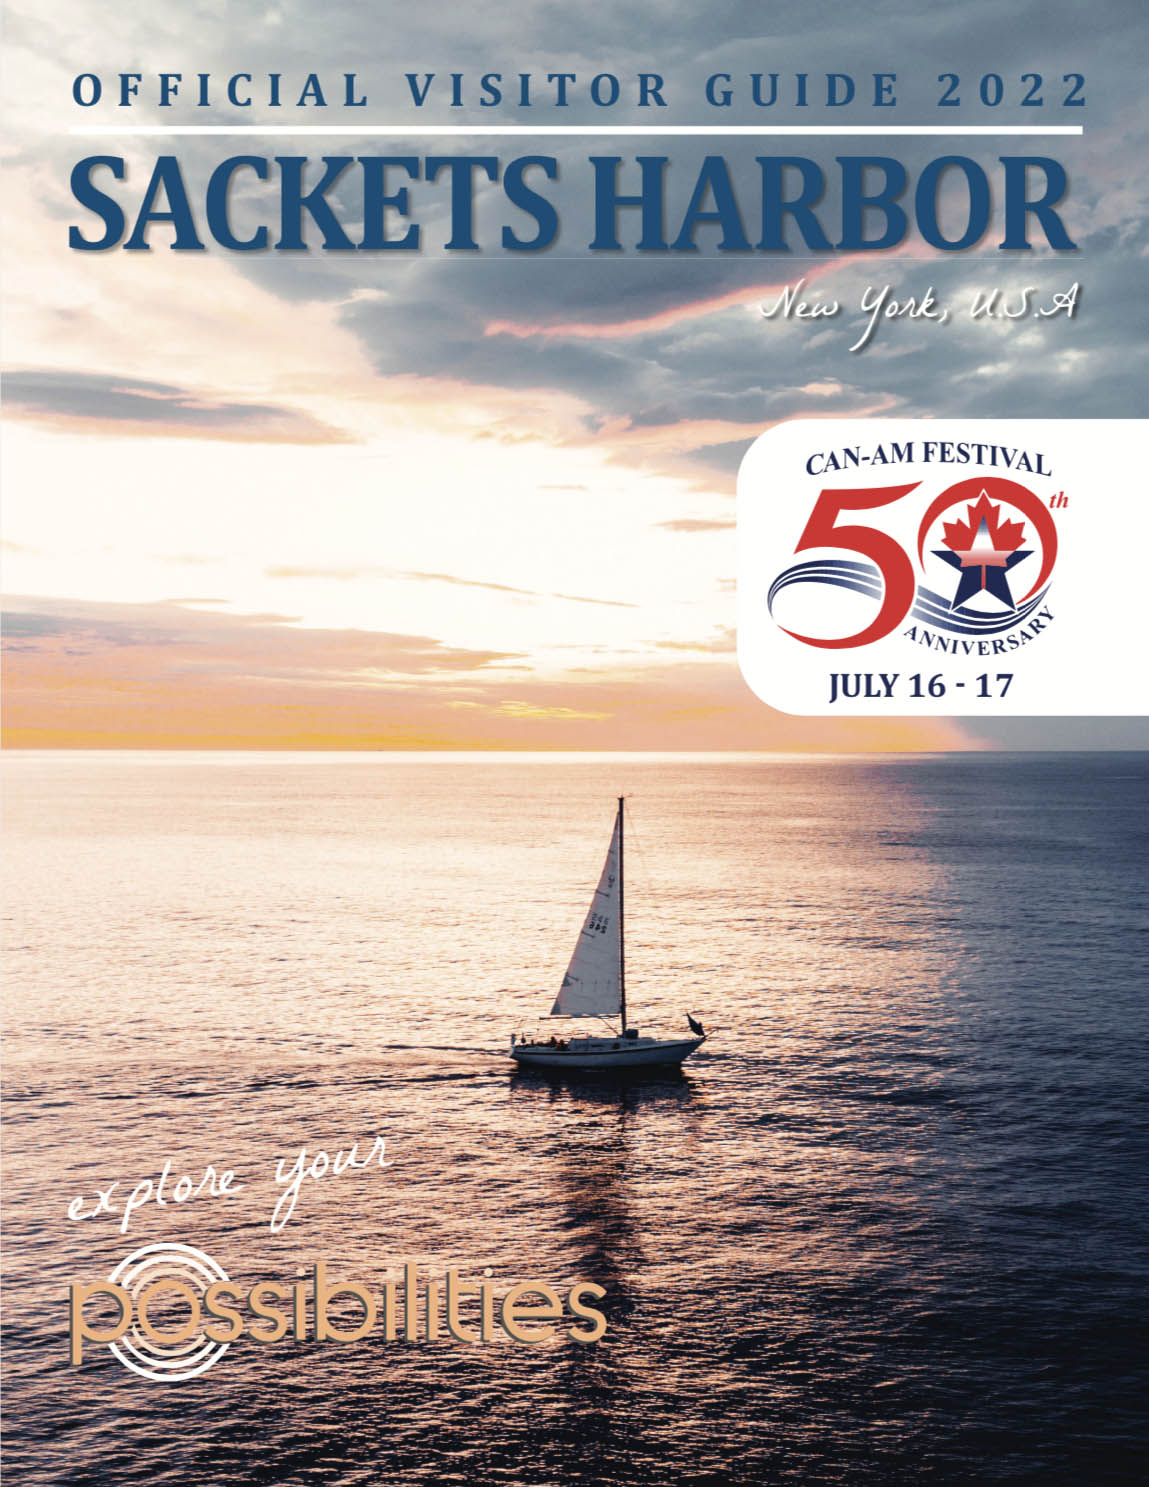 Cover of the 2022 Sackets Harbor Visitor Guide